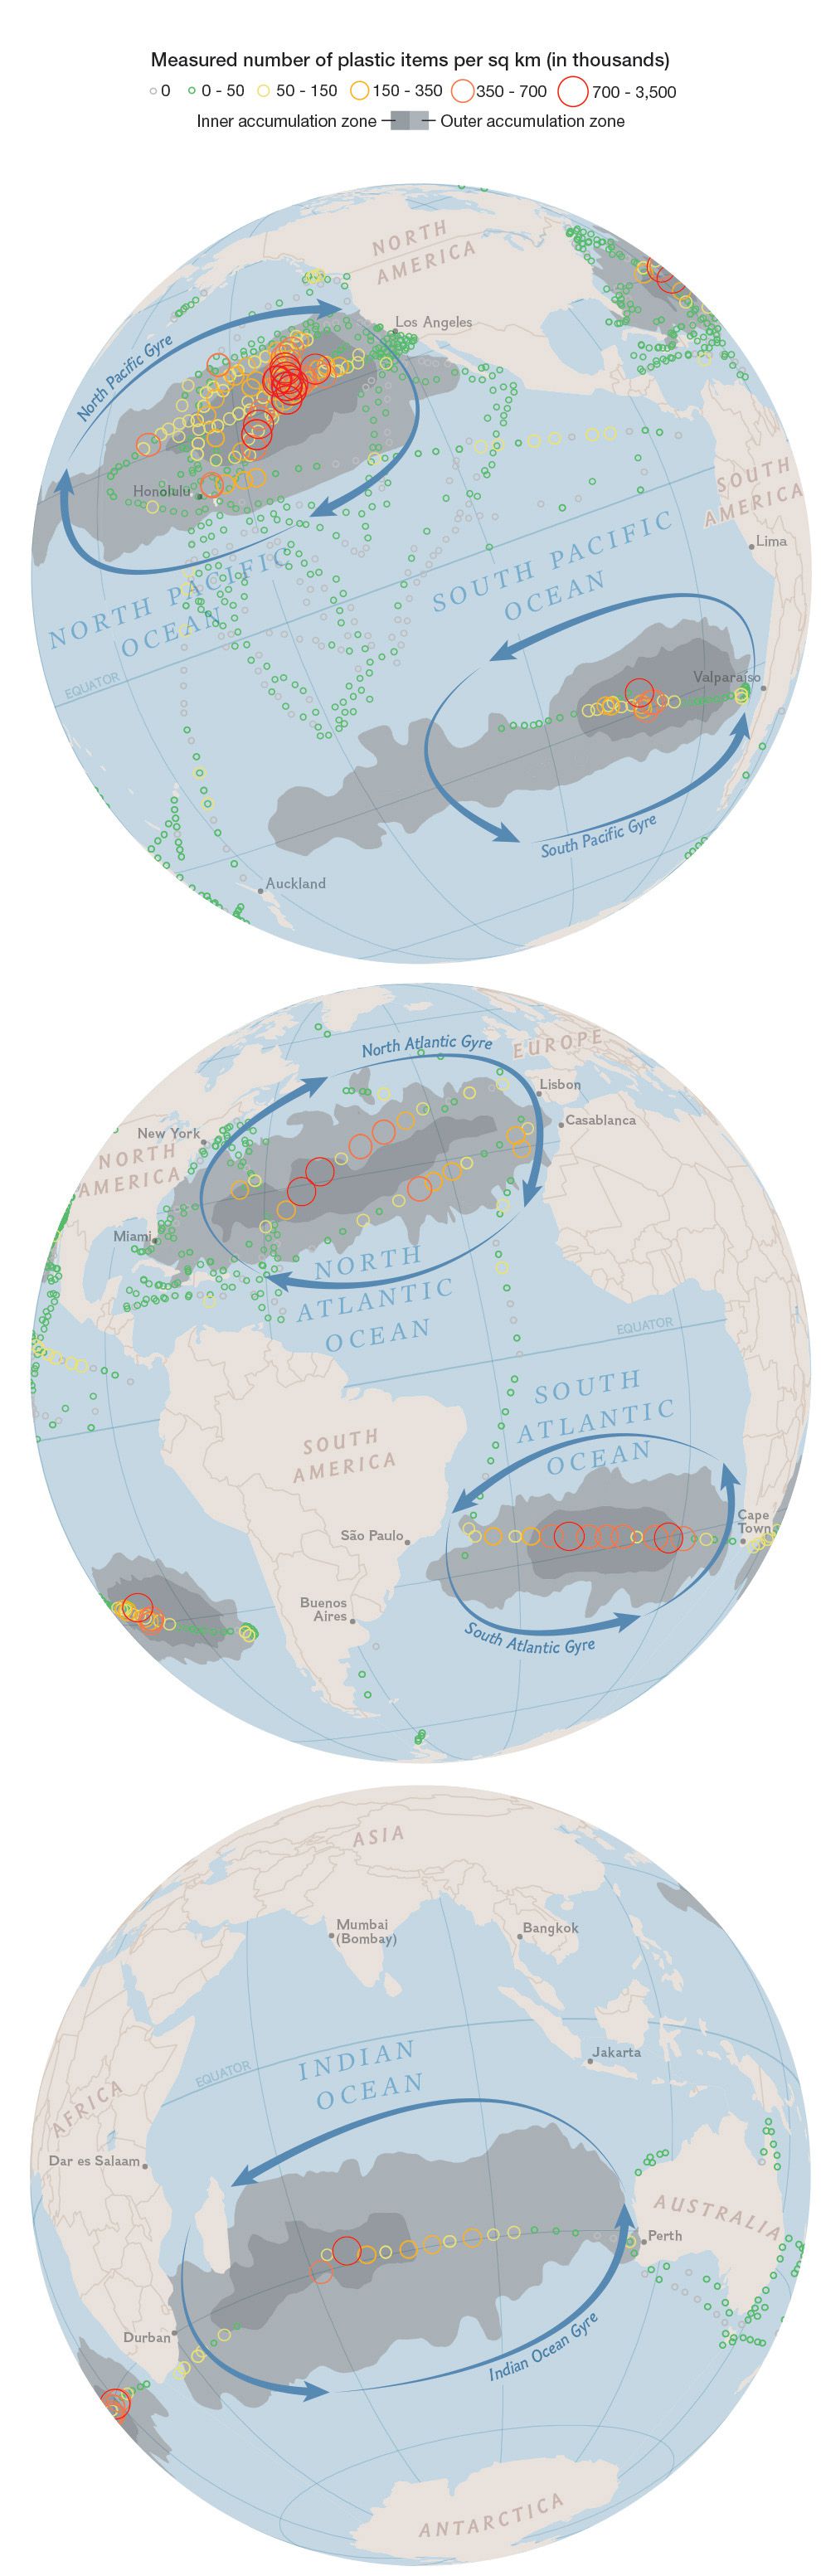 Garbage patches are found in the calm, stable centers of many of the world's ocean gyres. Even smaller bodies of water, such as the Mediterranean and North Seas, are developing their own garbage patches along heavily trafficked shipping lanes.